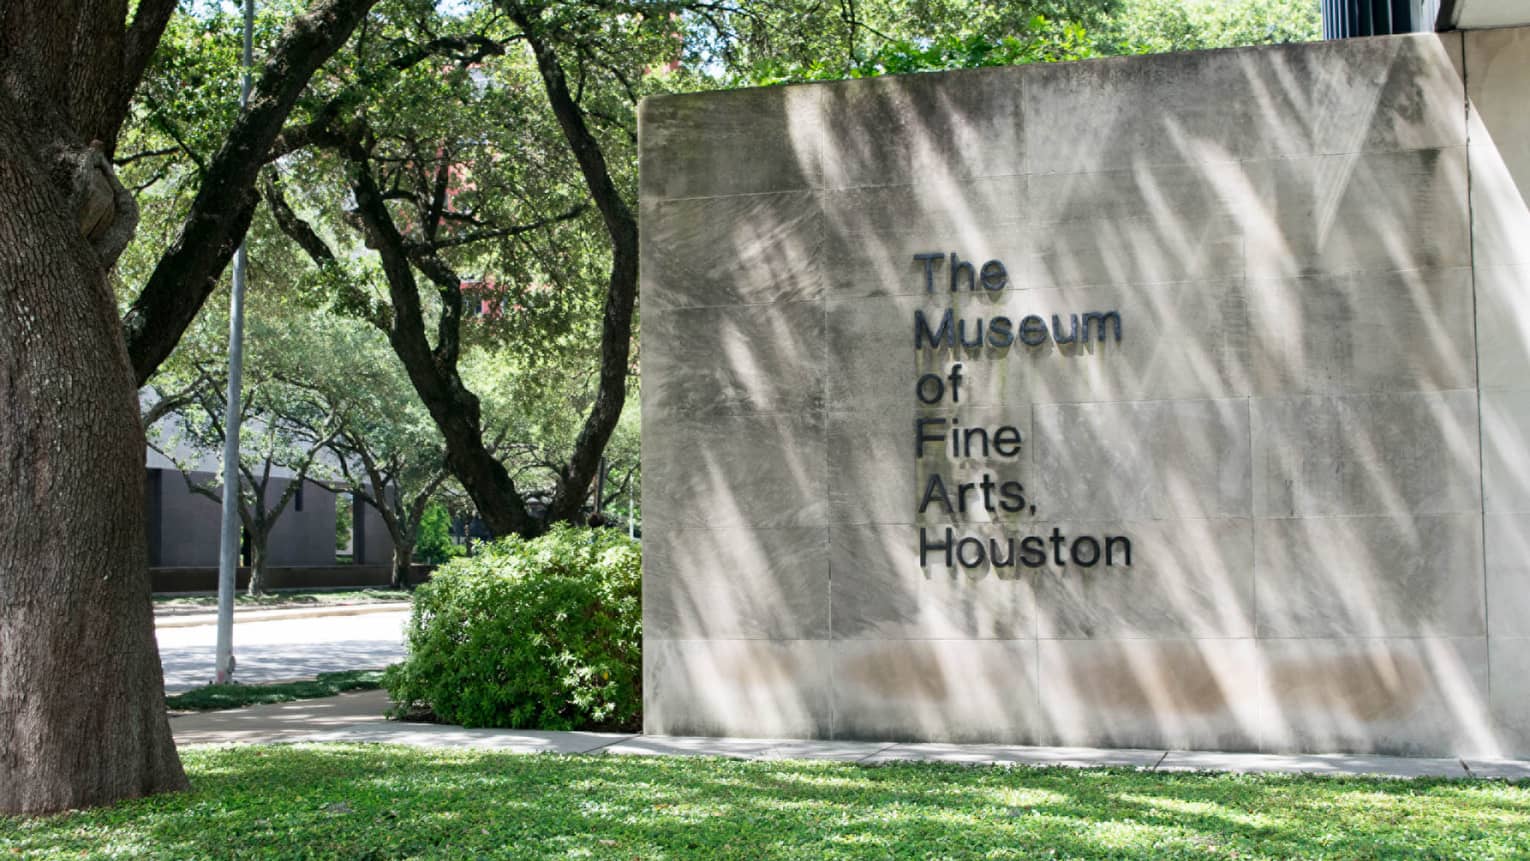 The Museum of Fine Arts Houston sign on stone wall by green lawn, trees